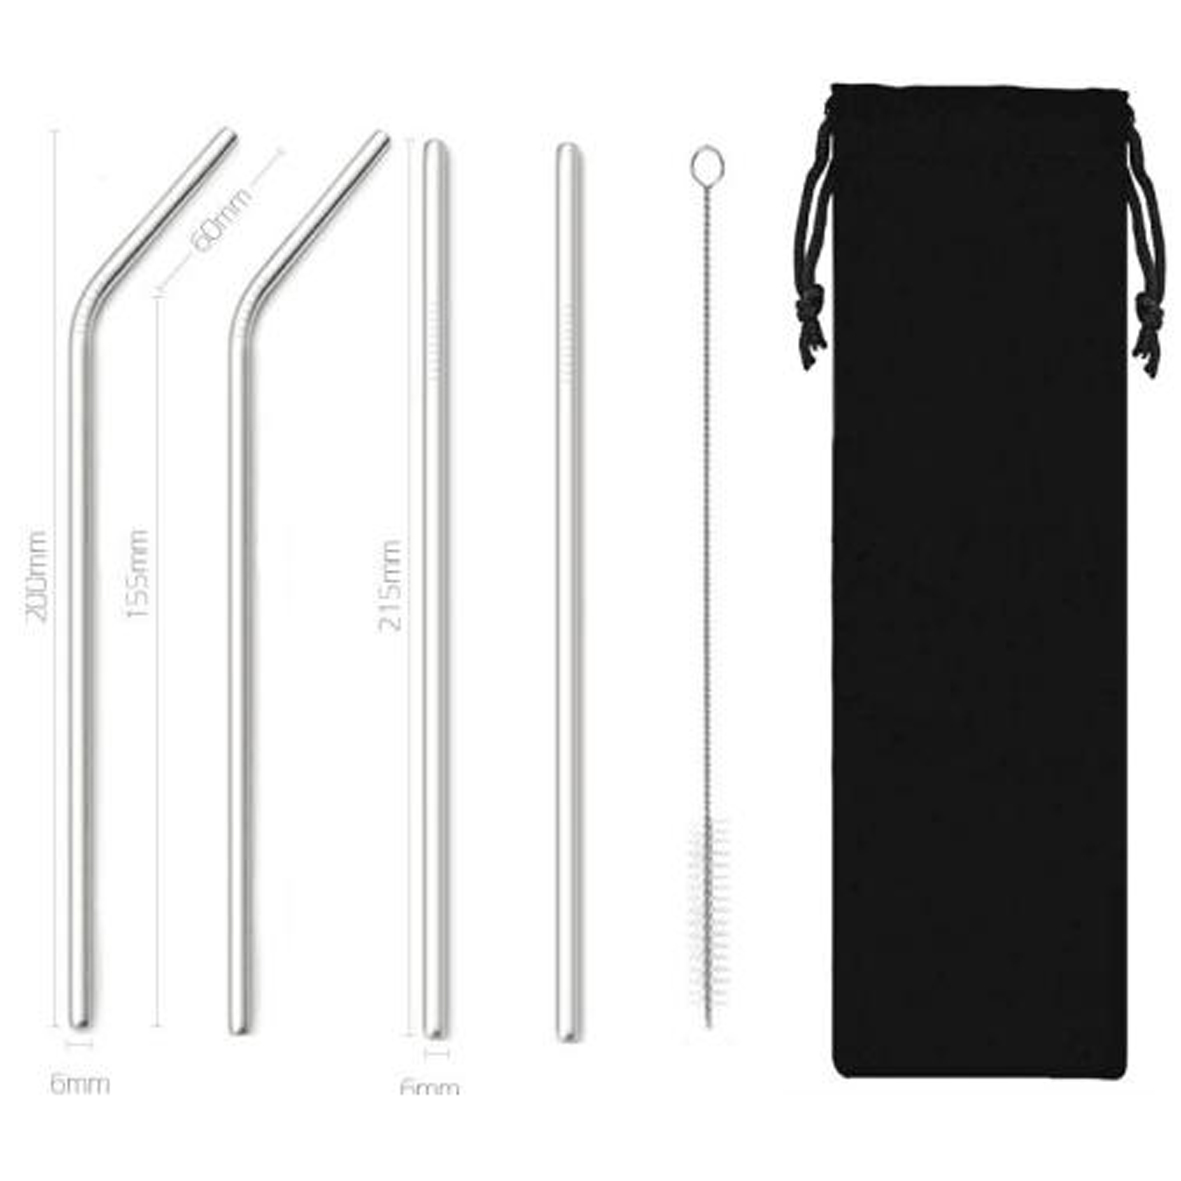 GL-ELY1252 5 in 1 Stainless Steel Straw